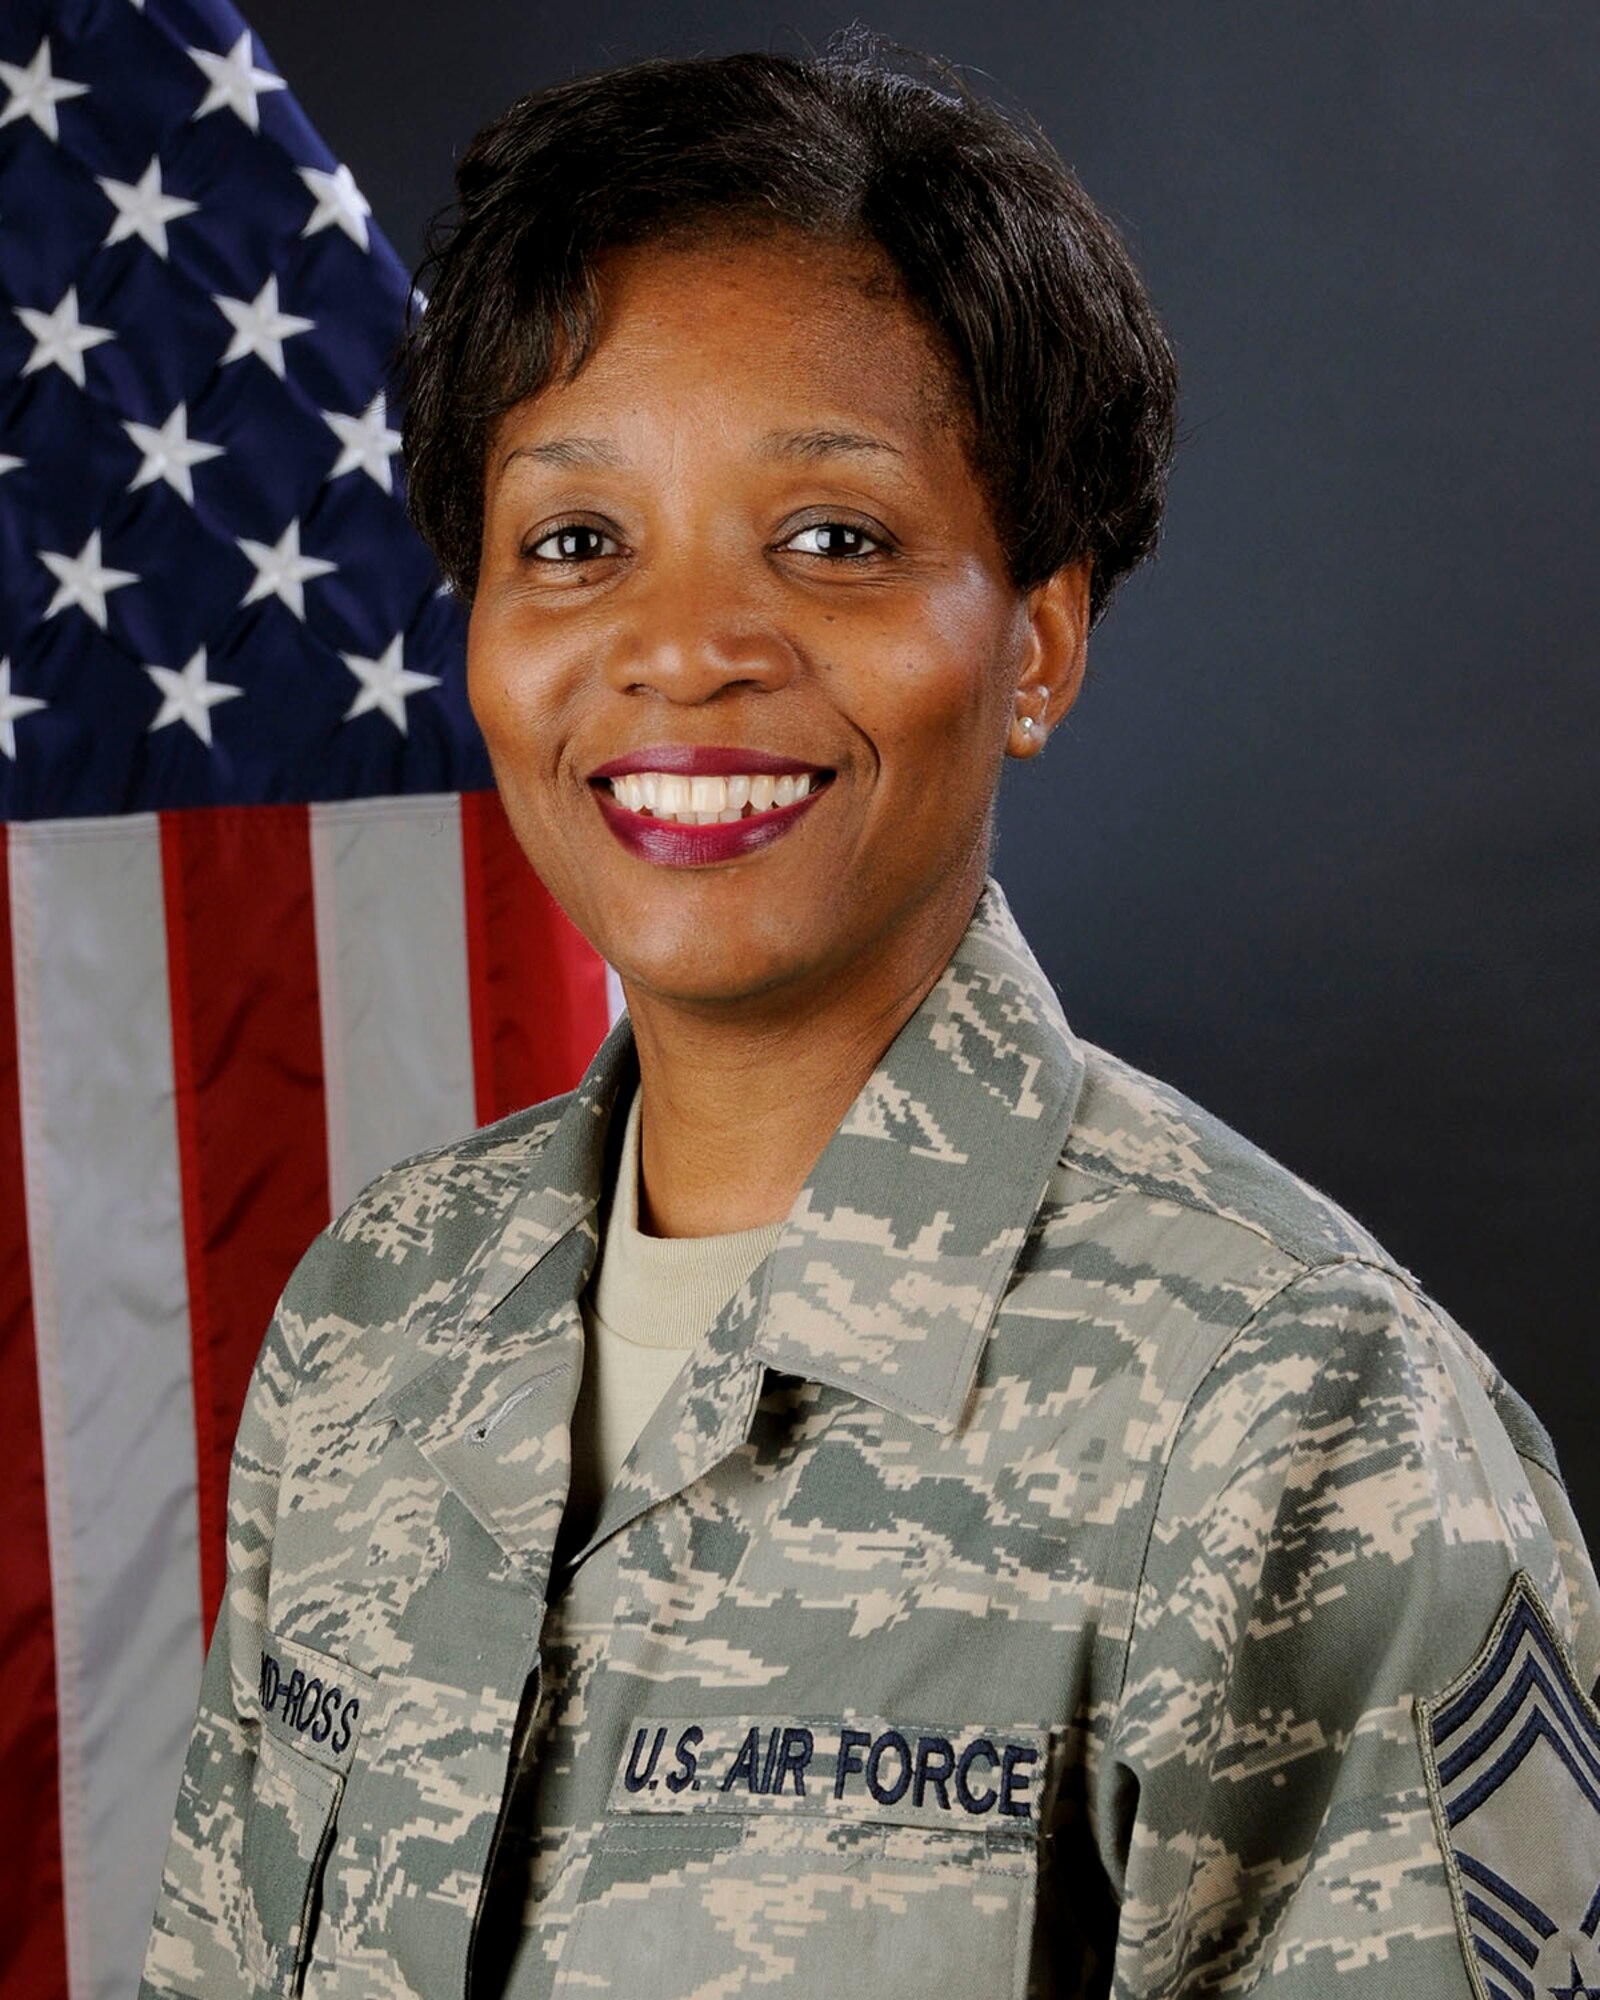 U.S. Air Force Chief Master Sgt. Bonita Floyd-Ross, with the 169th Mission Support Group at McEntire Joint National Guard Base, South Carolina Air National Guard, poses for her official portrait July 26, 2013.   (U.S. Air National Guard photo by Tech. Sgt. Caycee Watson/Released)